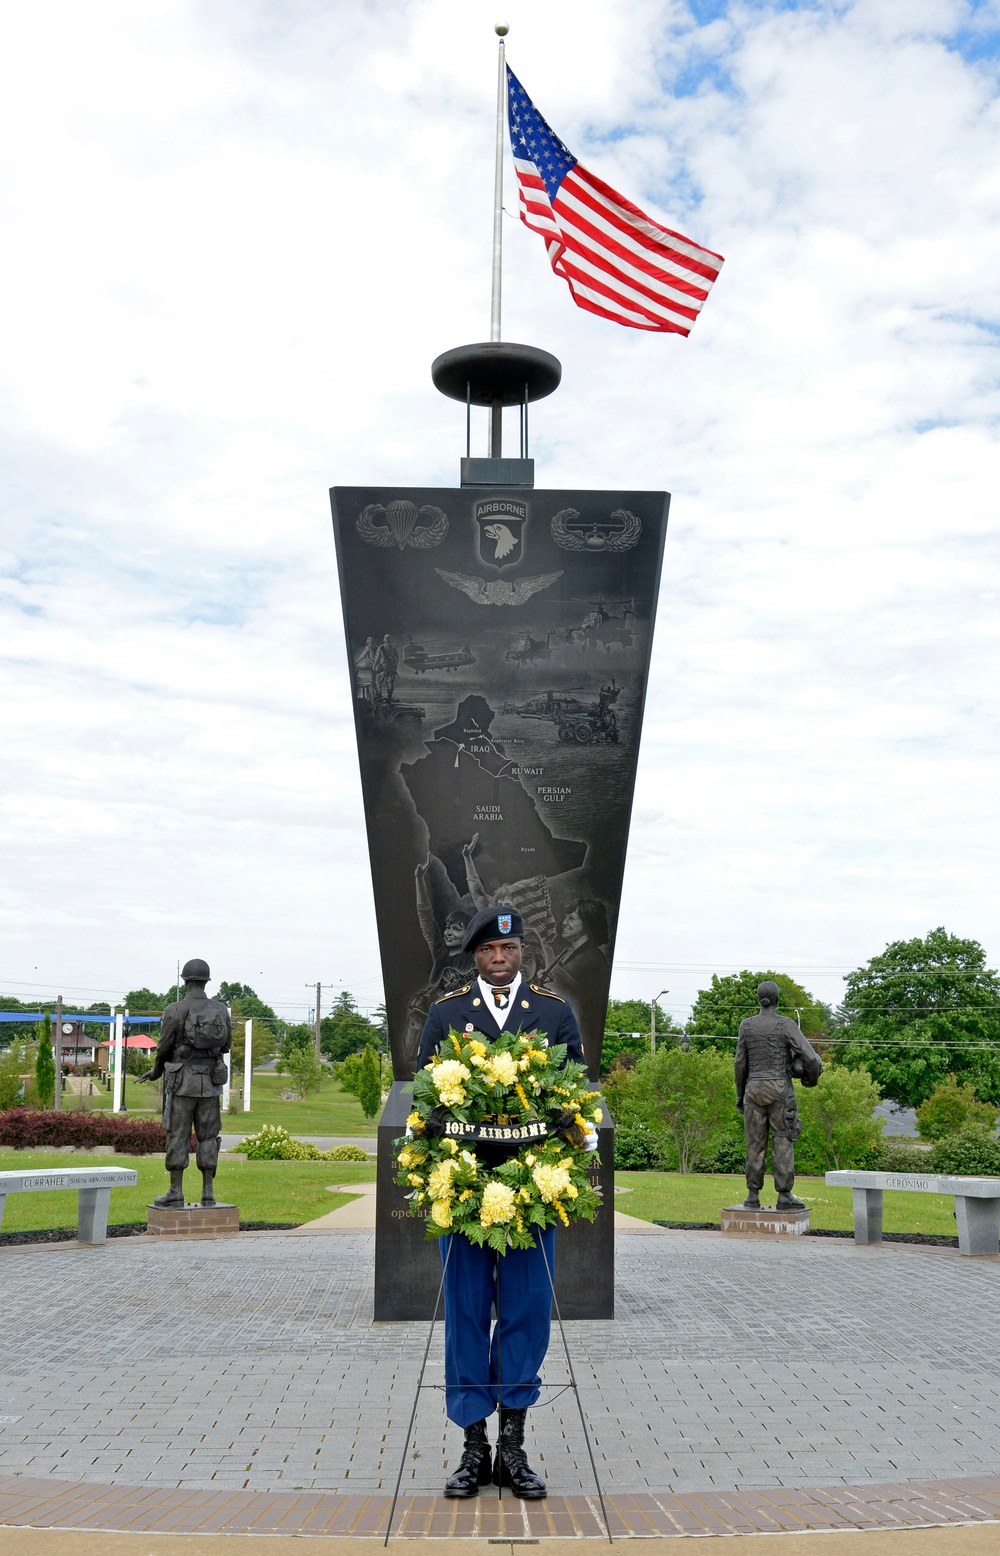 The Division Memorial Ceremony